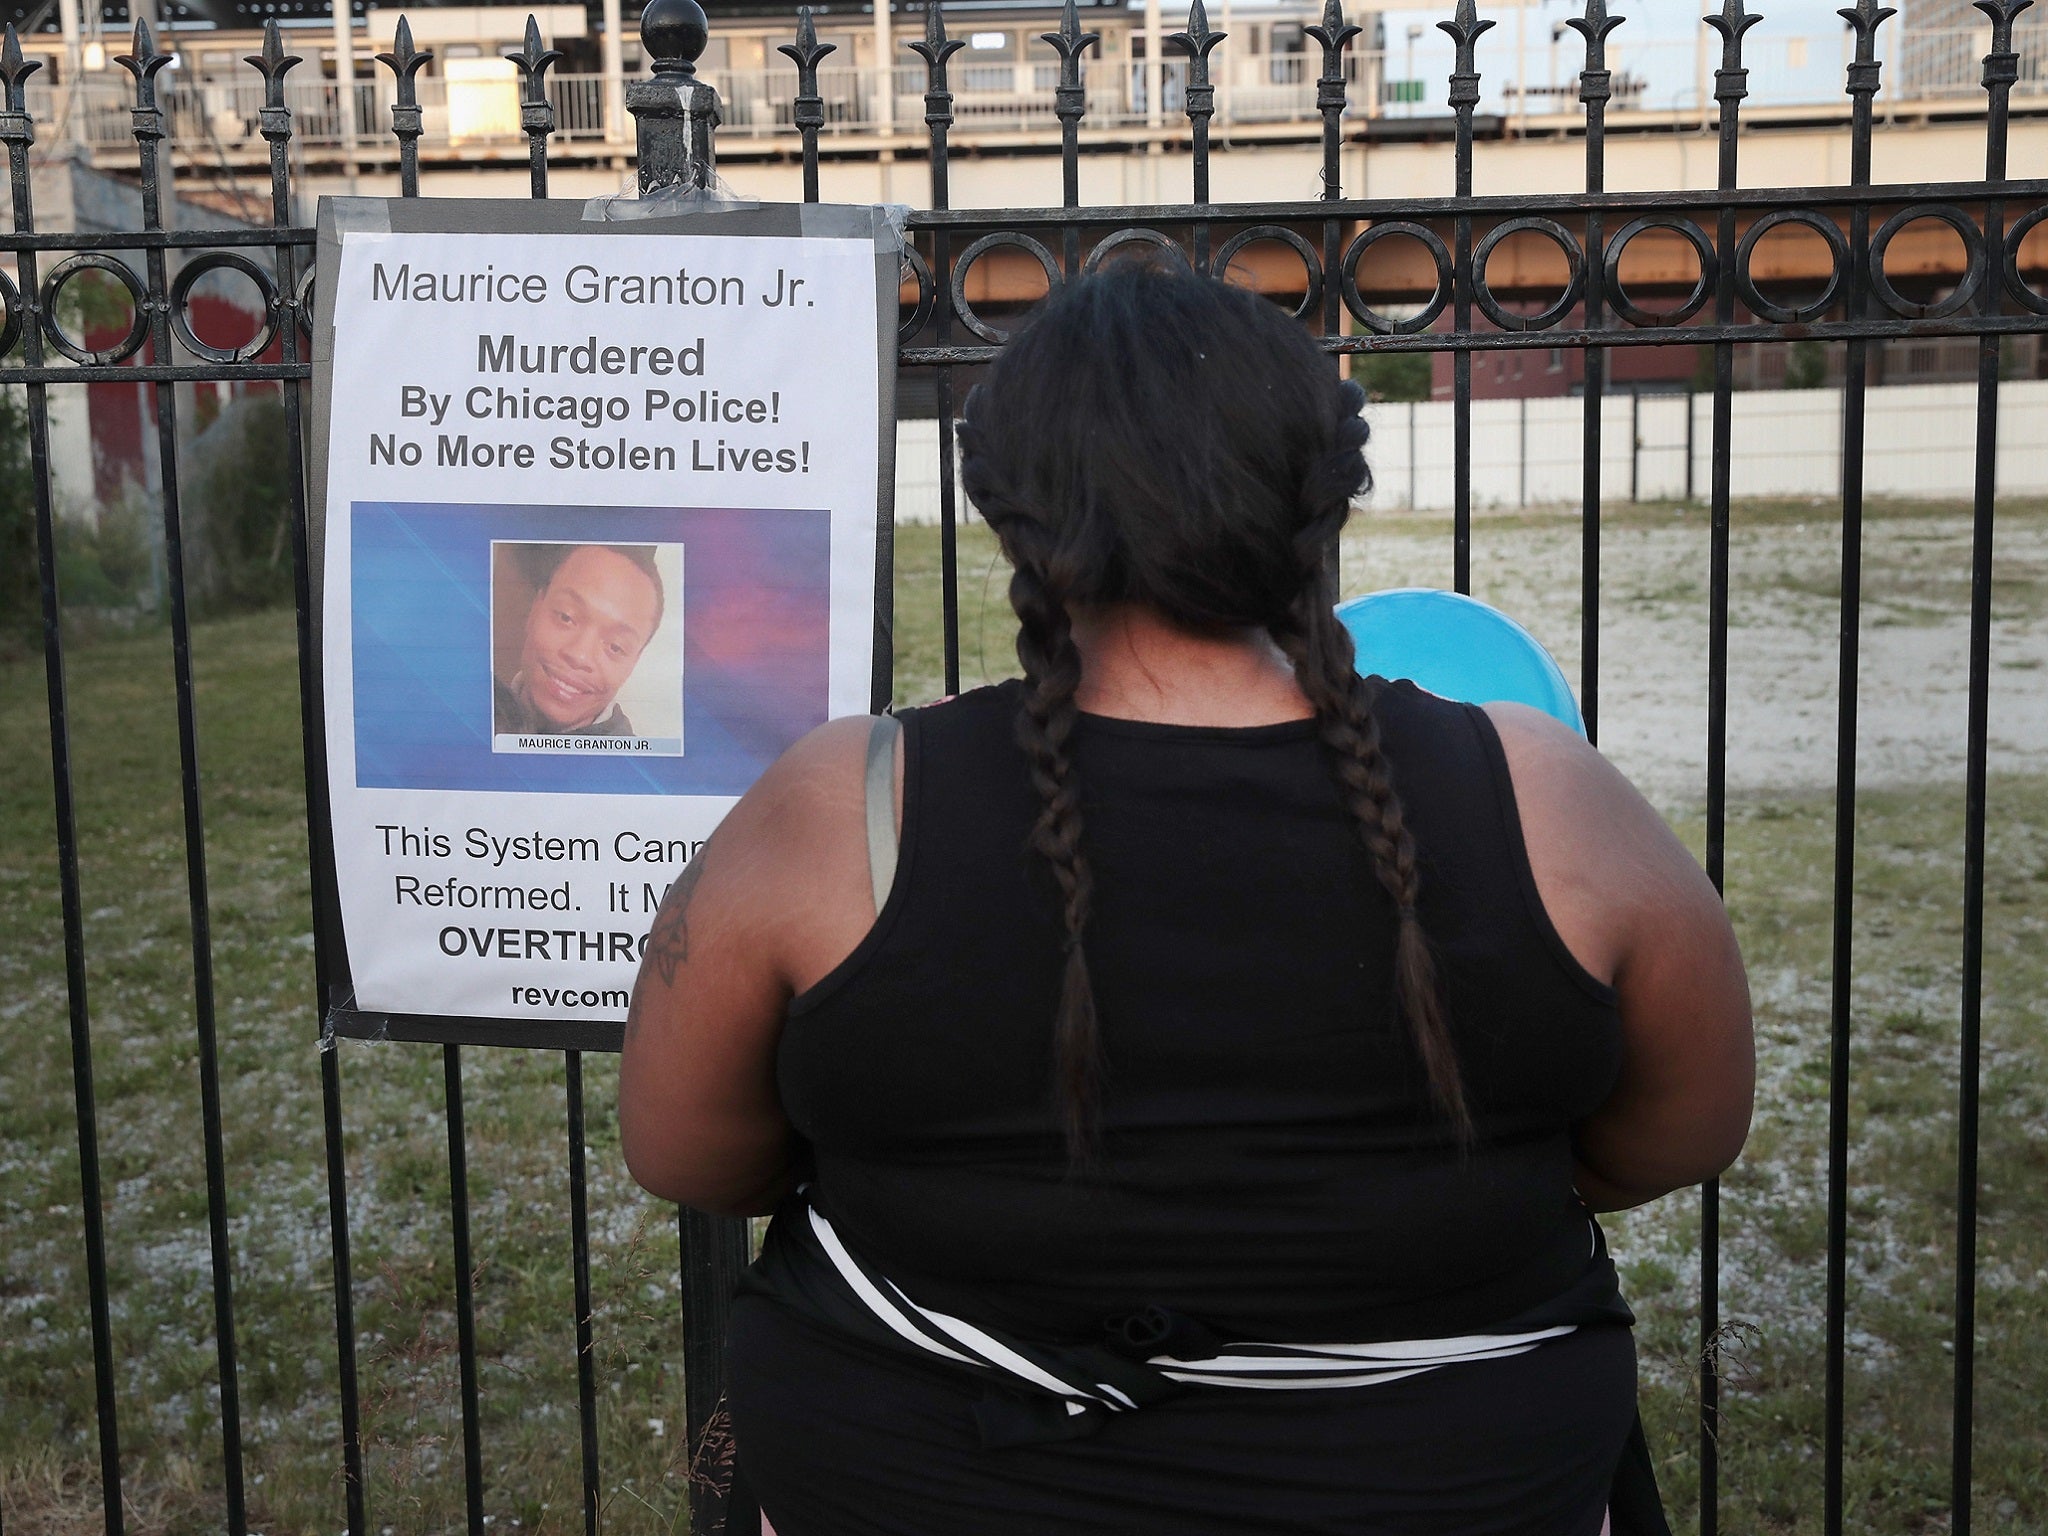 Tayshia Shaw mourns the loss of the father of her children, 24 year old Maurice Granton Jr, during a vigil in the Bronzeville neighborhood on June 7, 2018 in Chicago